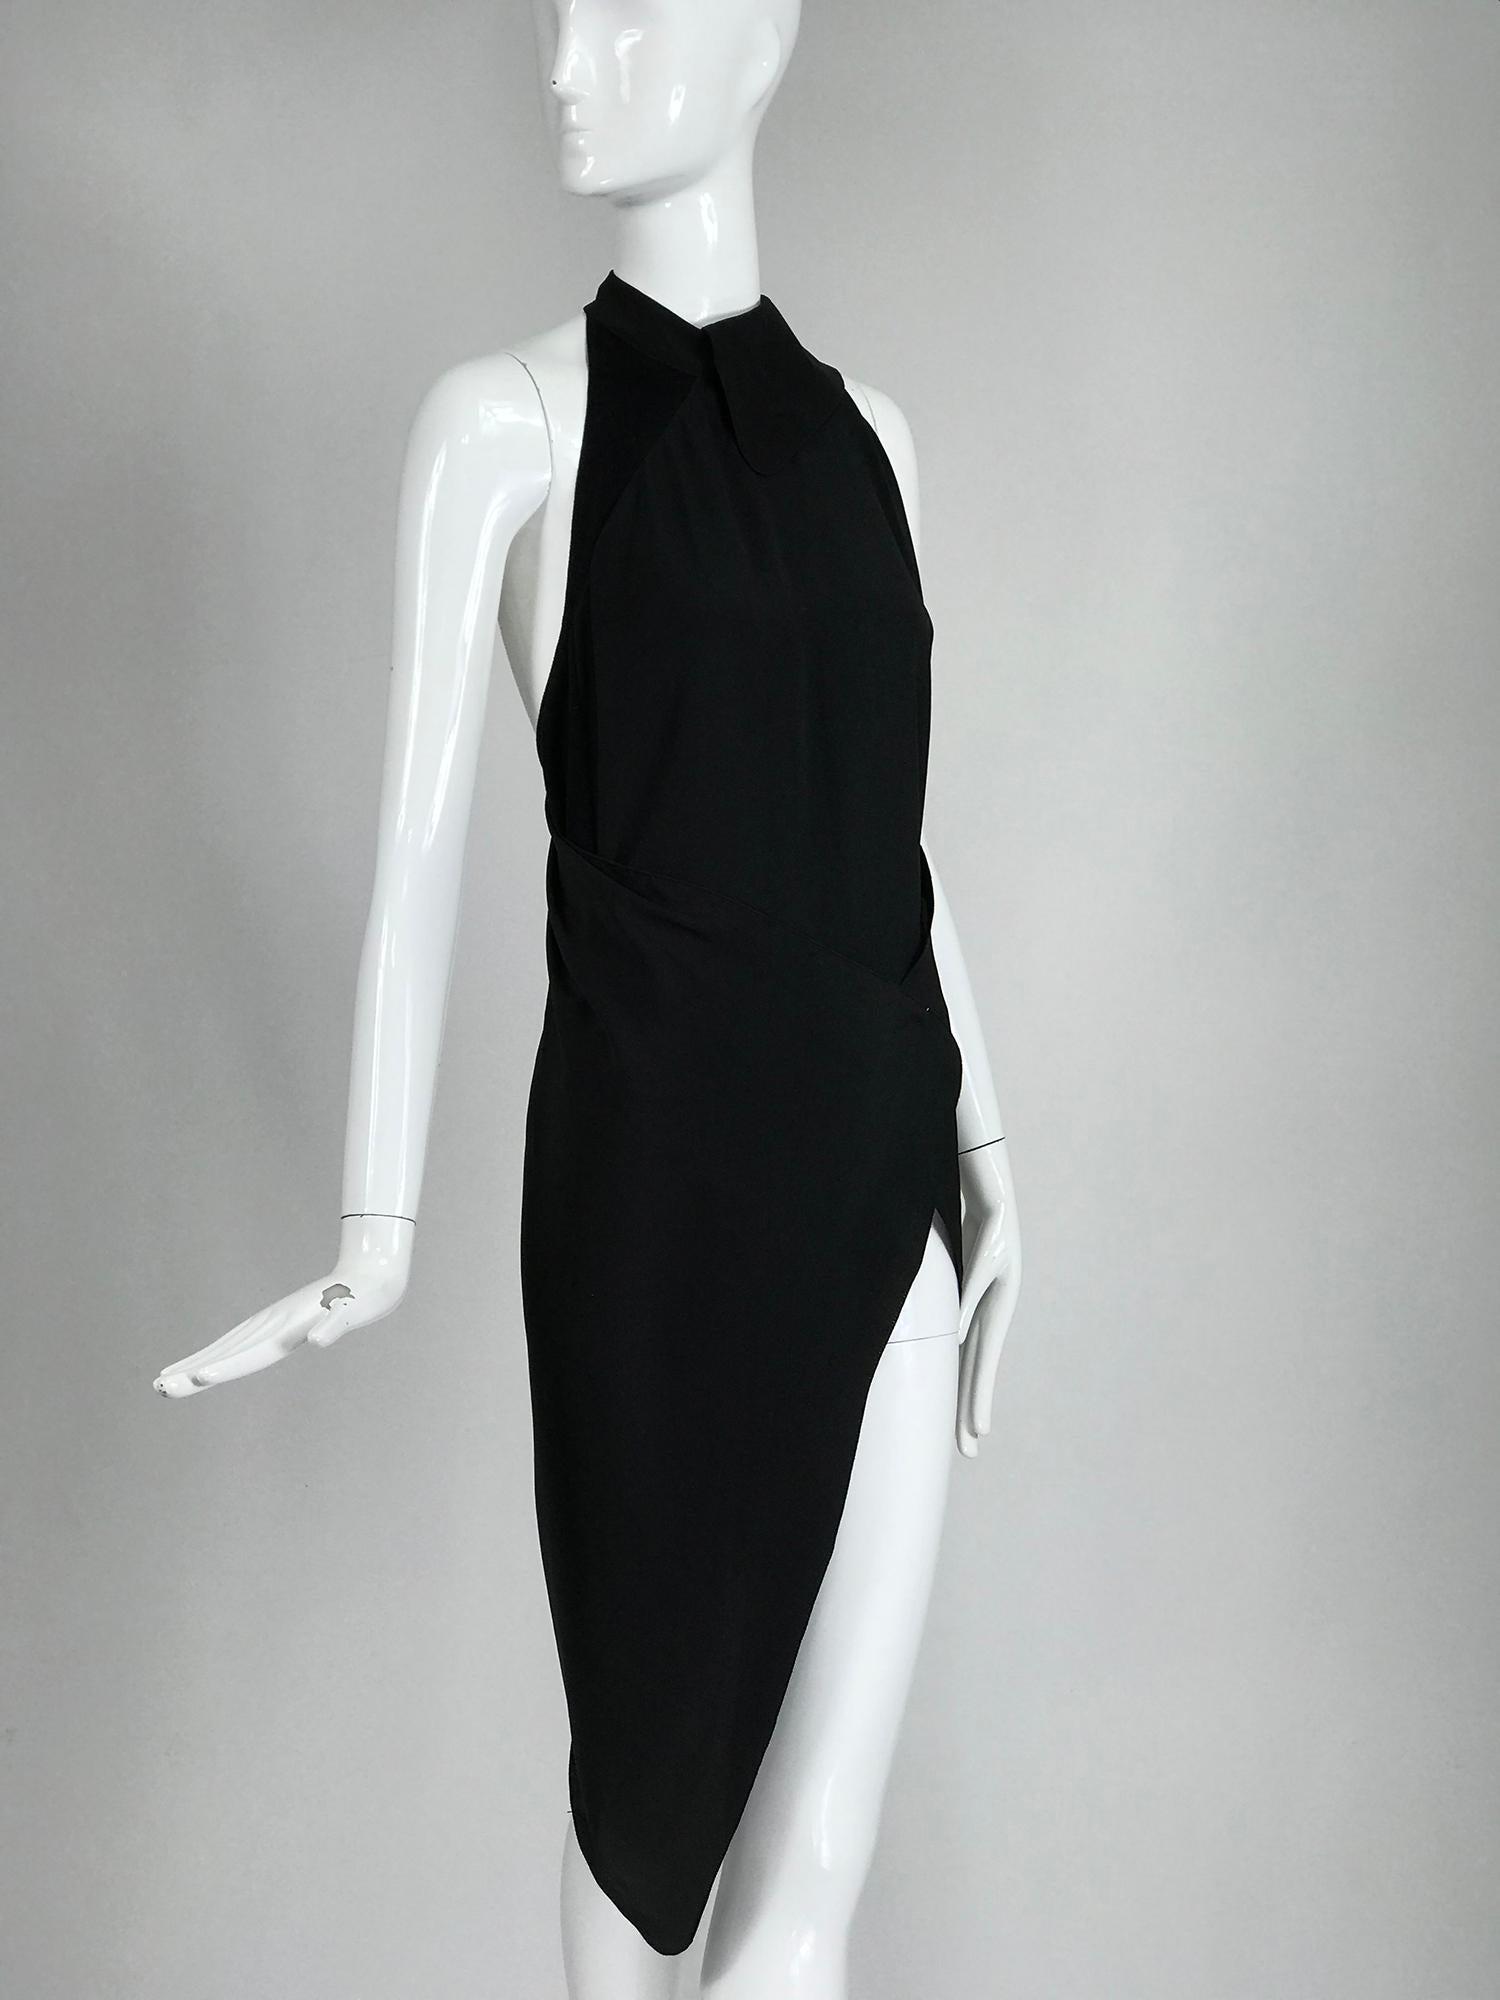 Gianfranco Ferre black silk and sweater knit body suit with wrap skirt or drape from the 1980s. This unique garment consists of a body suit that closes at the collar neckline with a hidden button, it is geometrically pieced with silk blend fabric